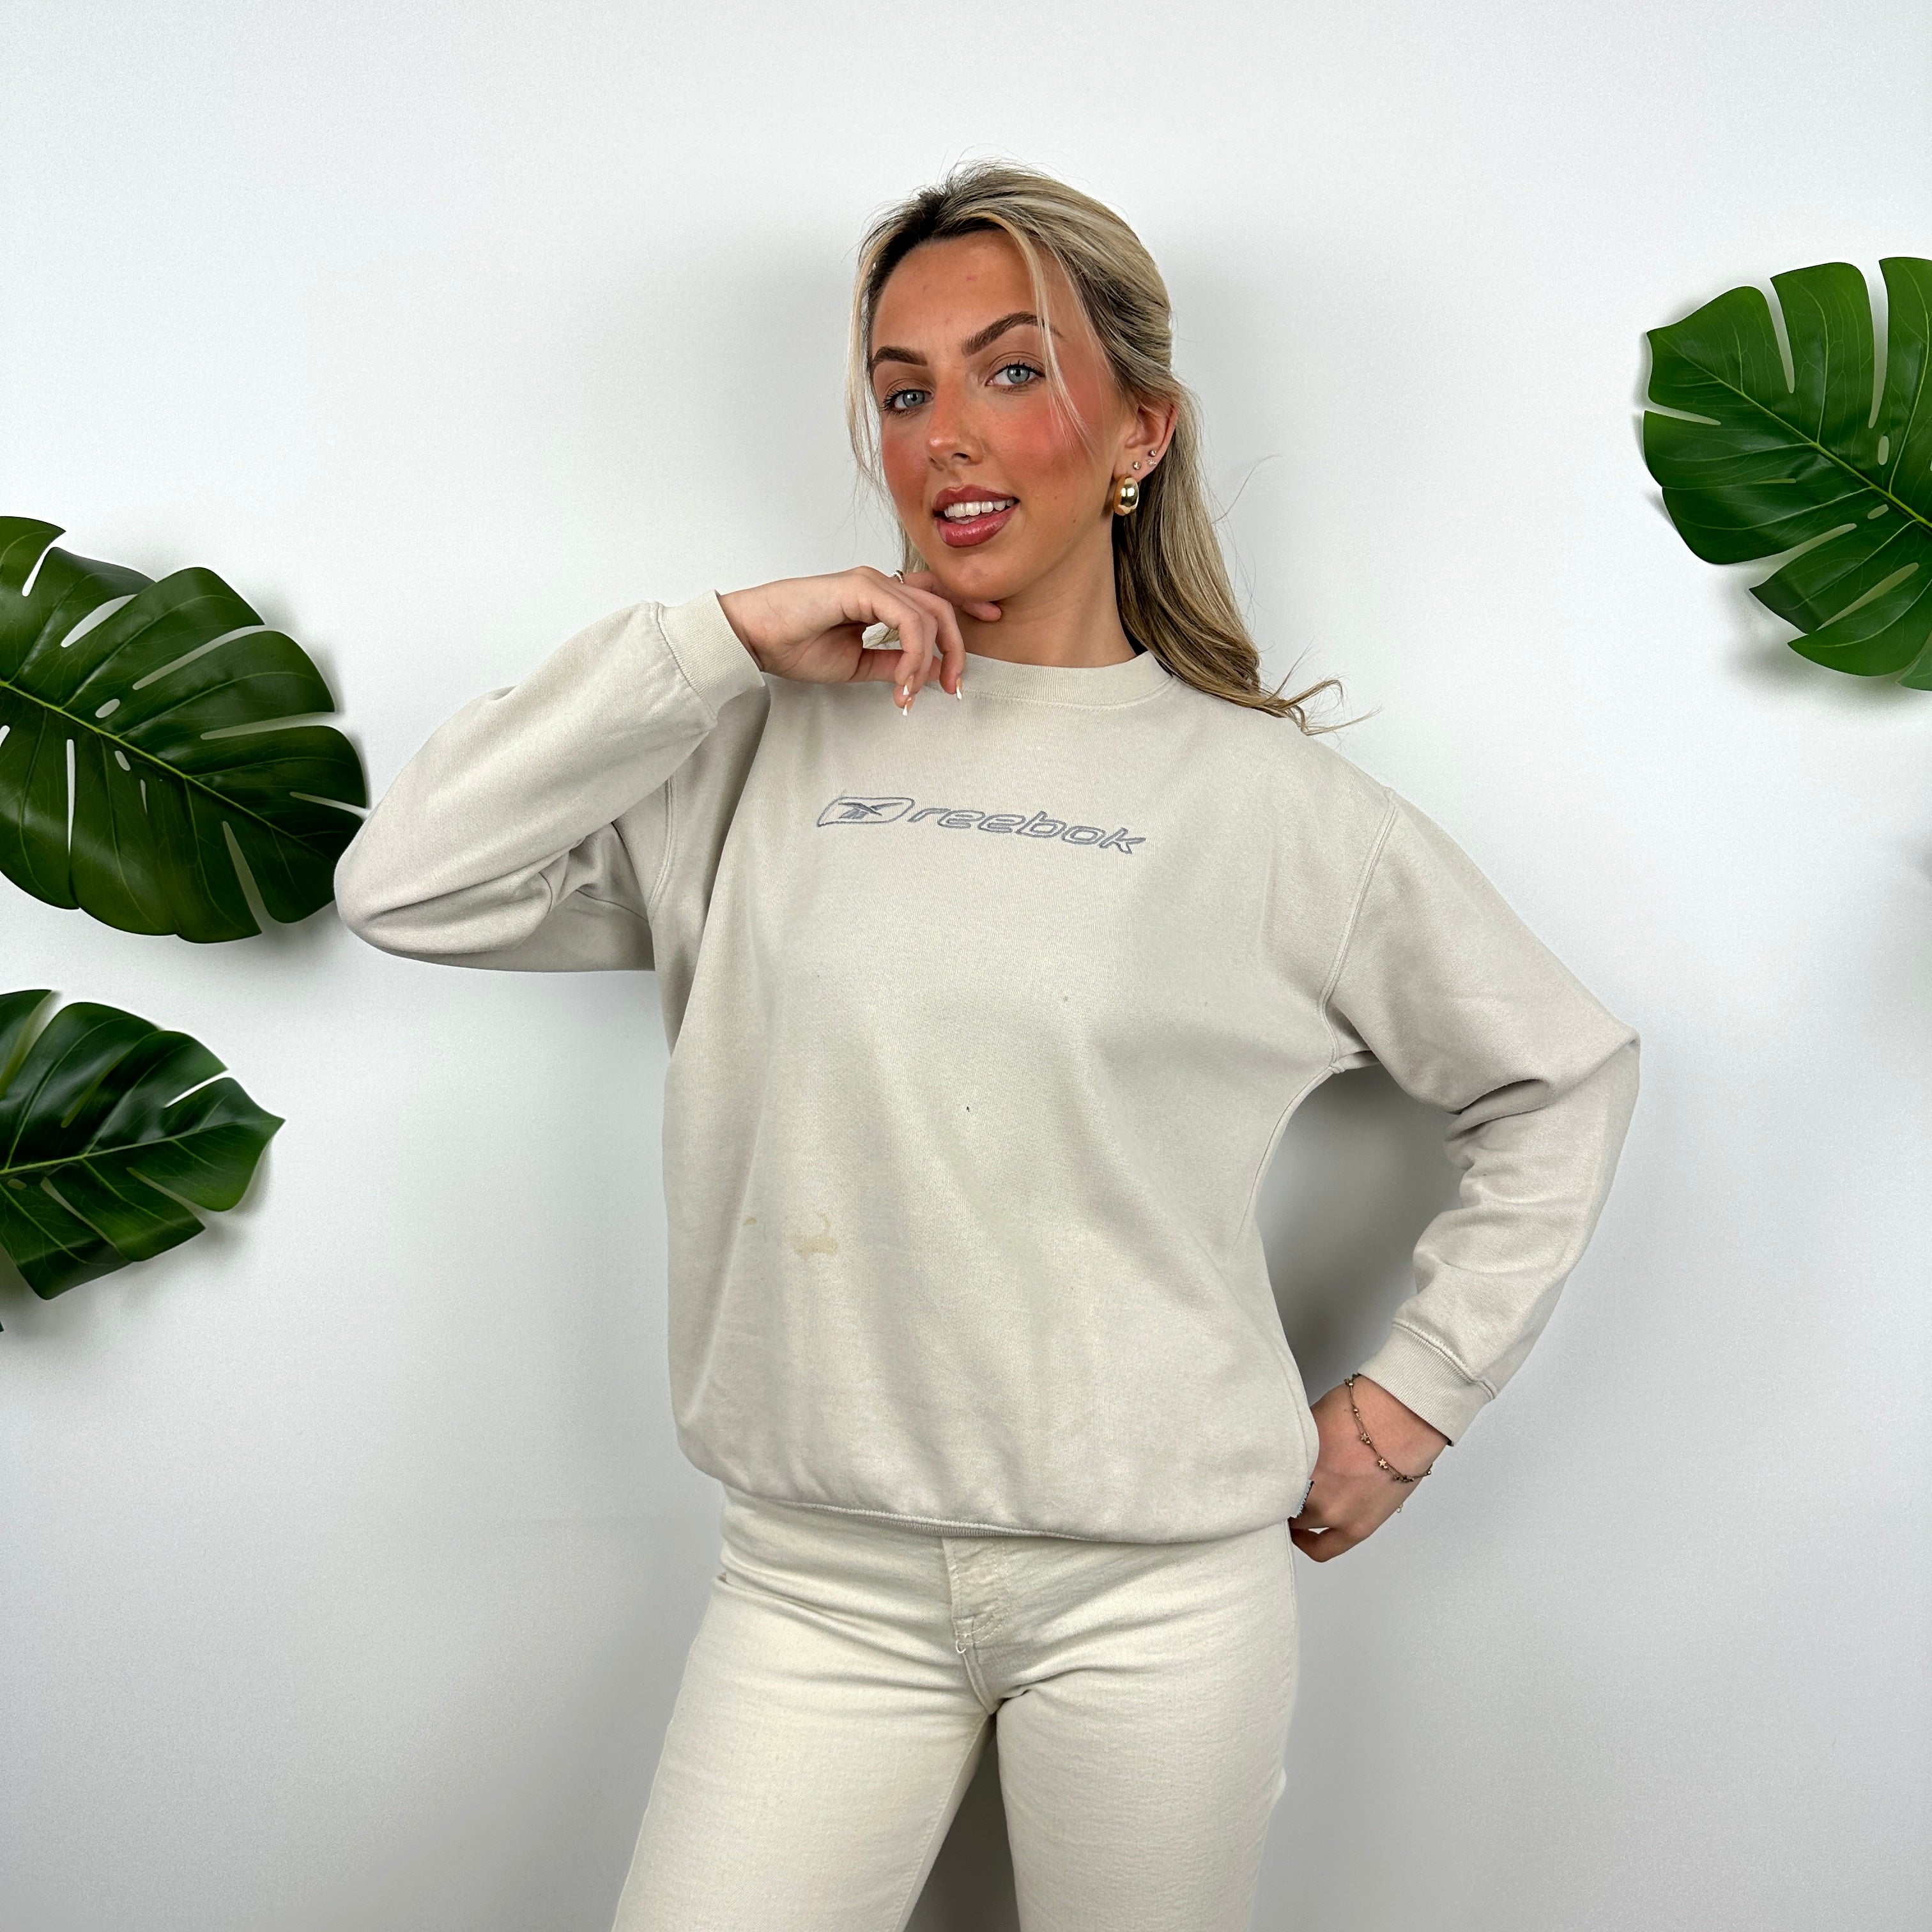 Reebok Cream Embroidered Spell Out Sweatshirt (M)